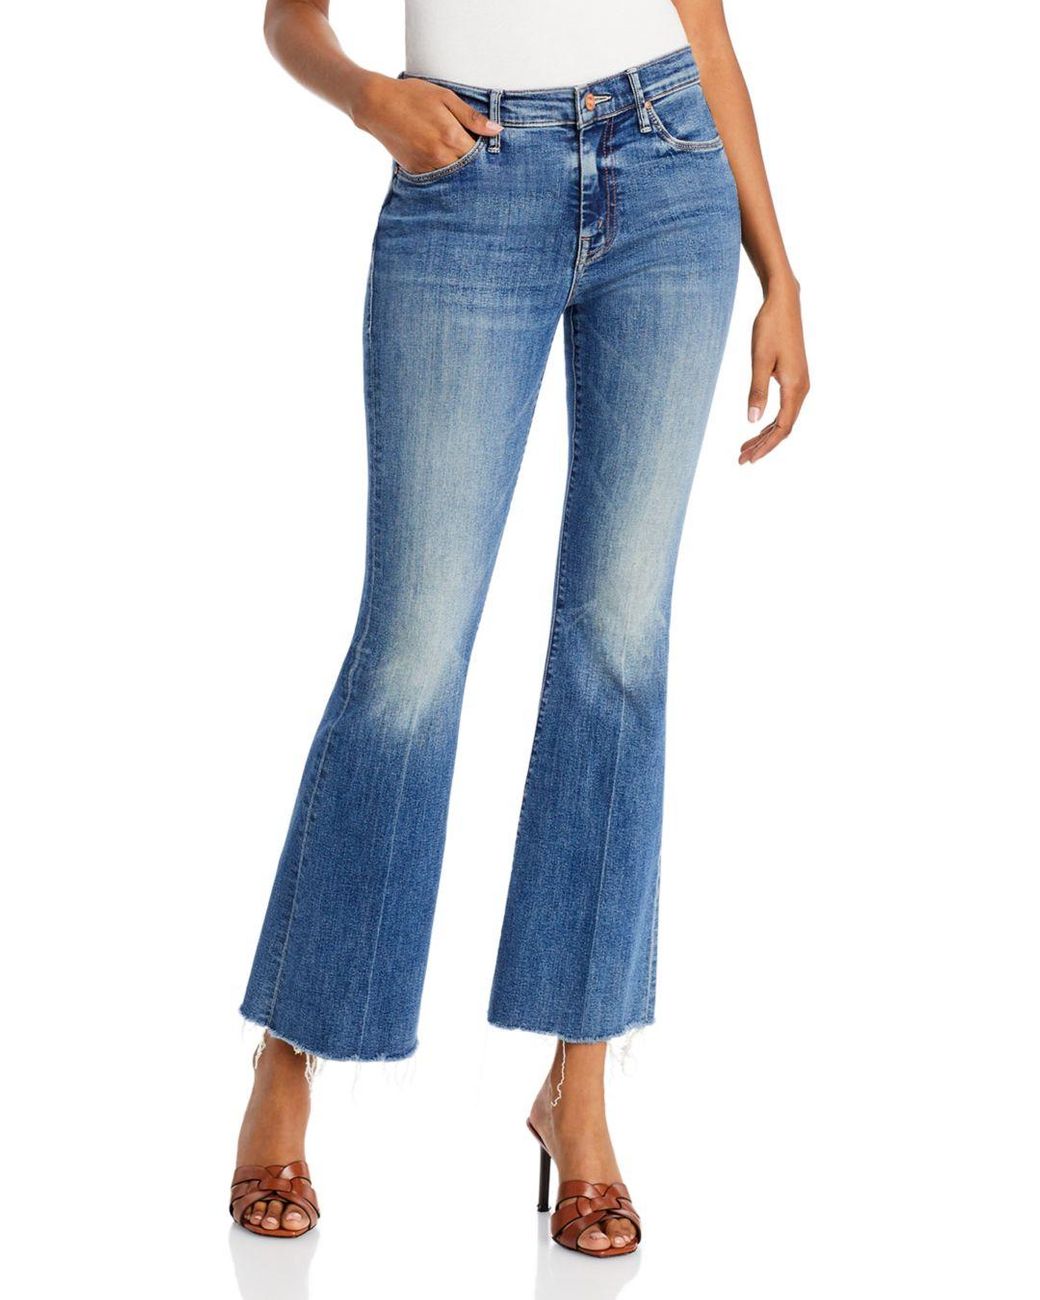 Bloomingdales Women Clothing Jeans Flared Jeans The Weekender Mid Rise Flared Jeans in Walking On Coals 